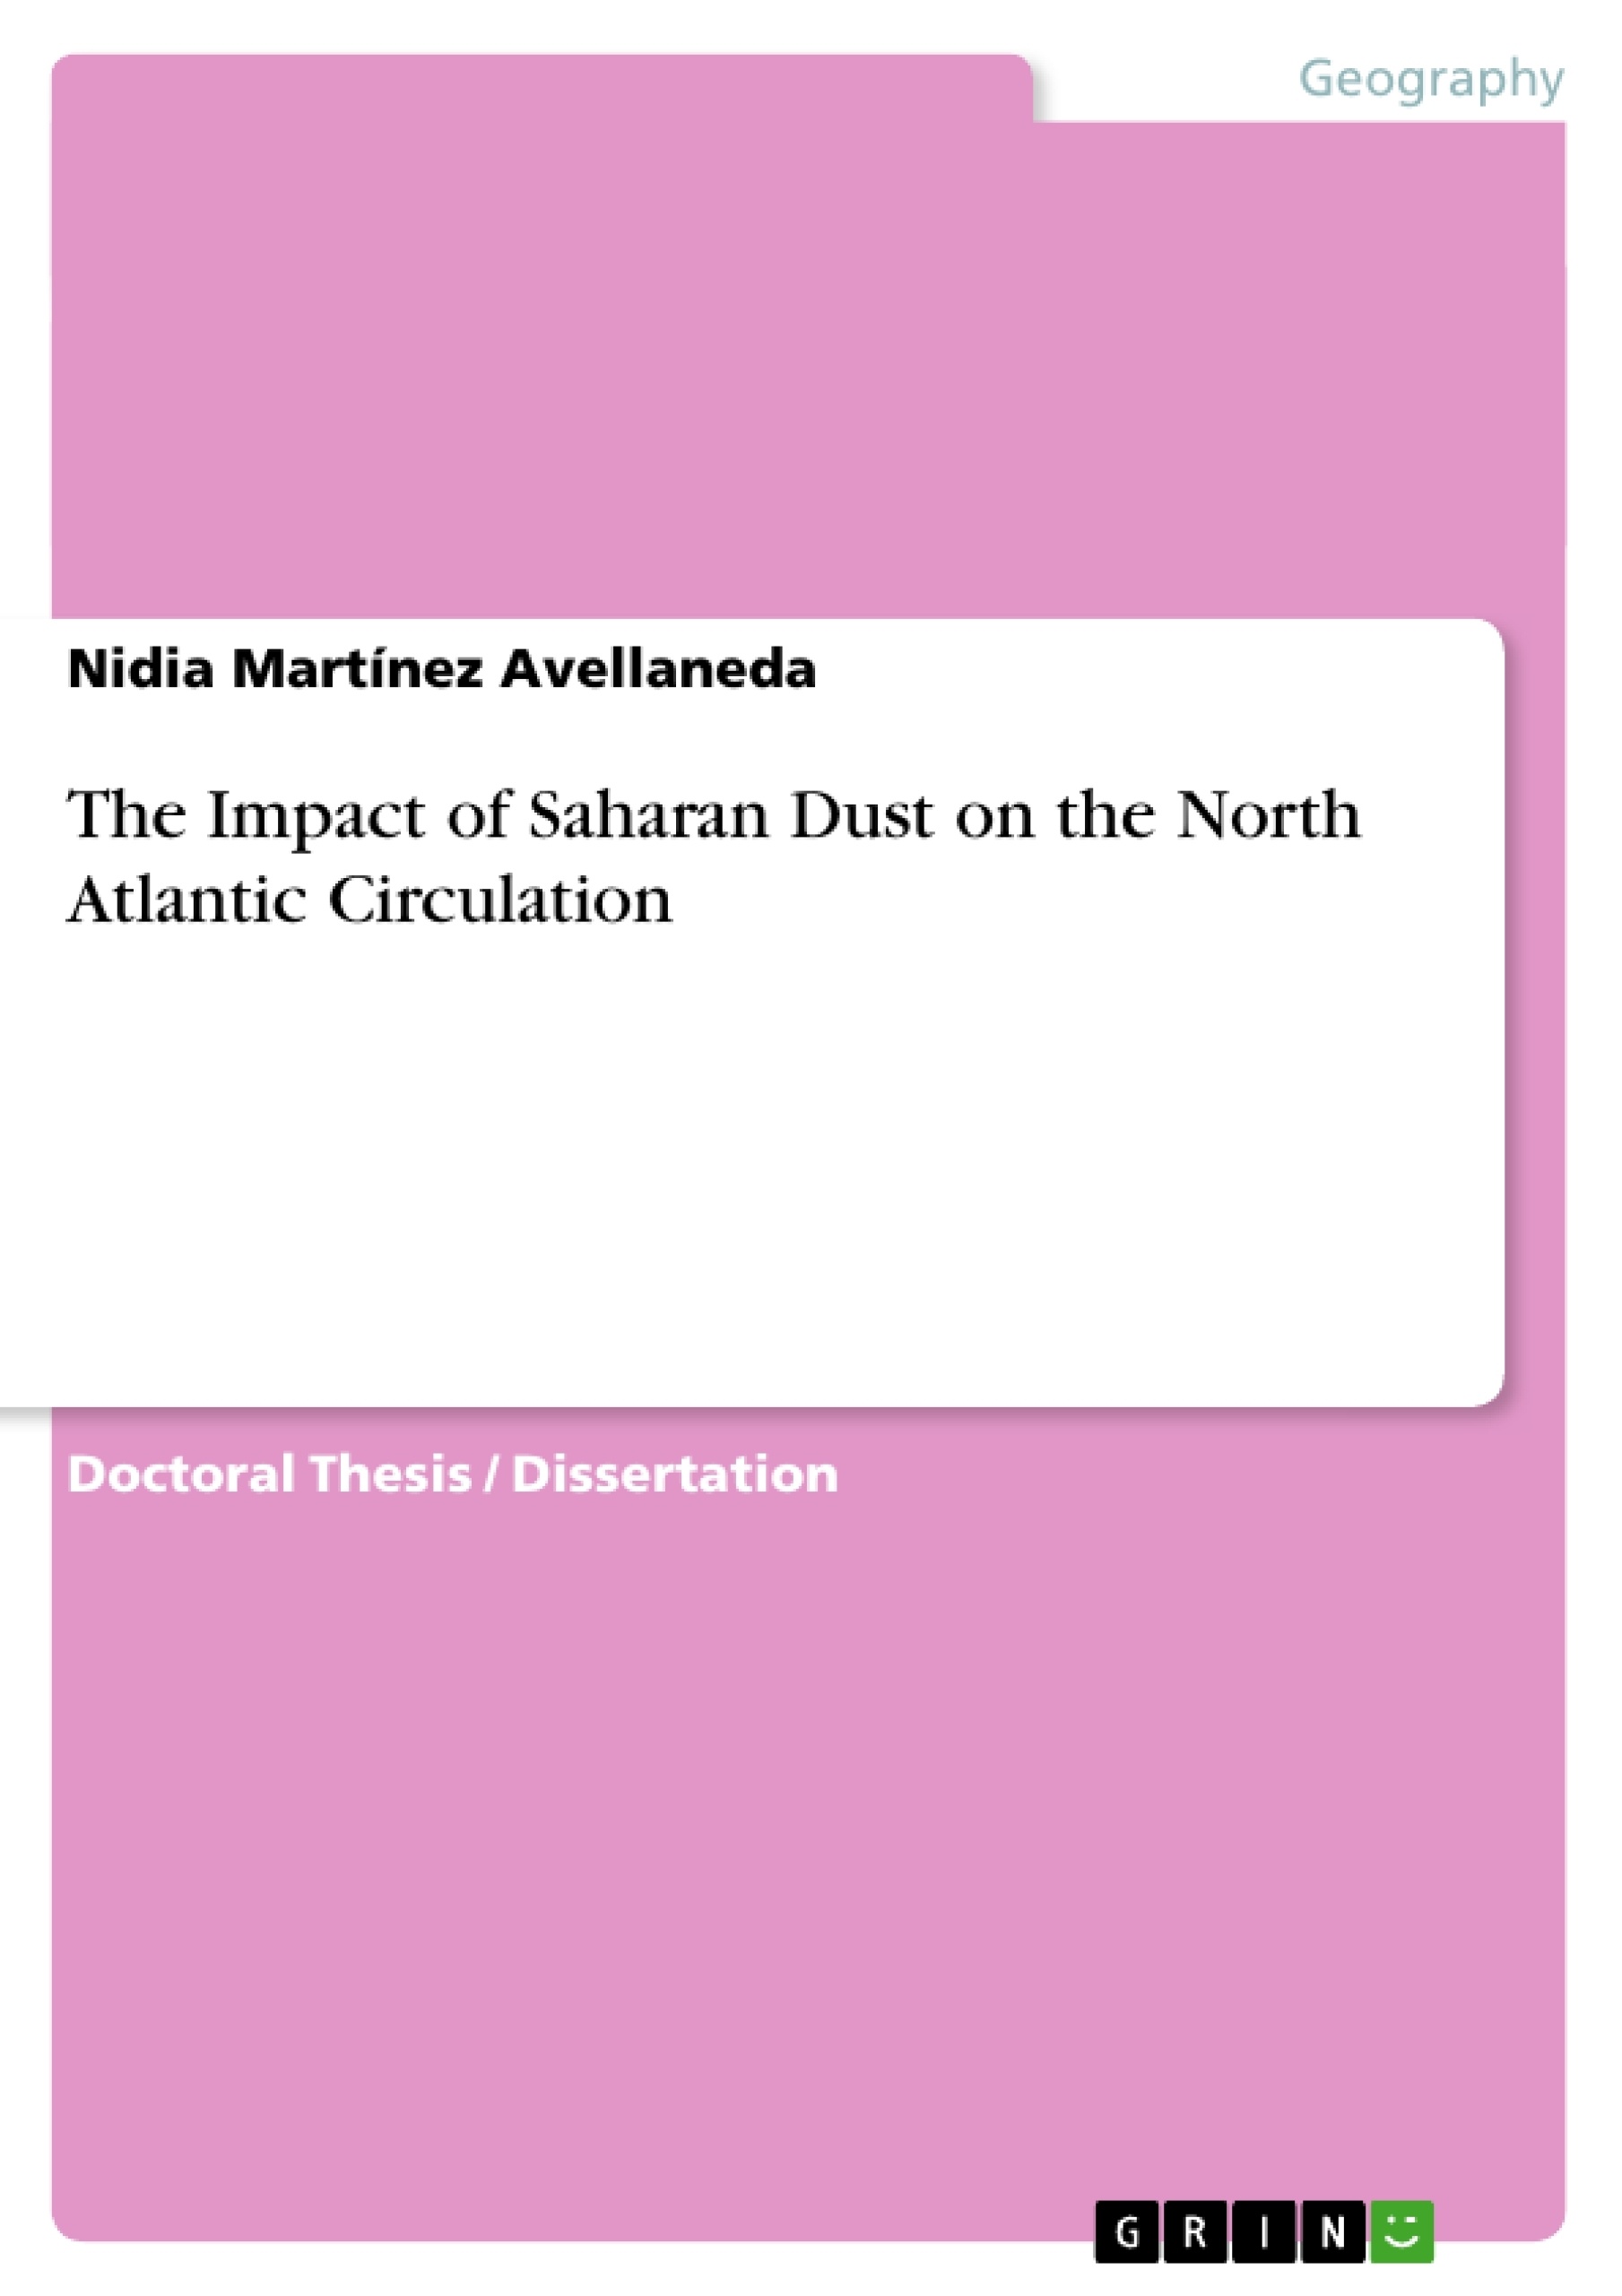 Title: The Impact of Saharan Dust on the North Atlantic Circulation